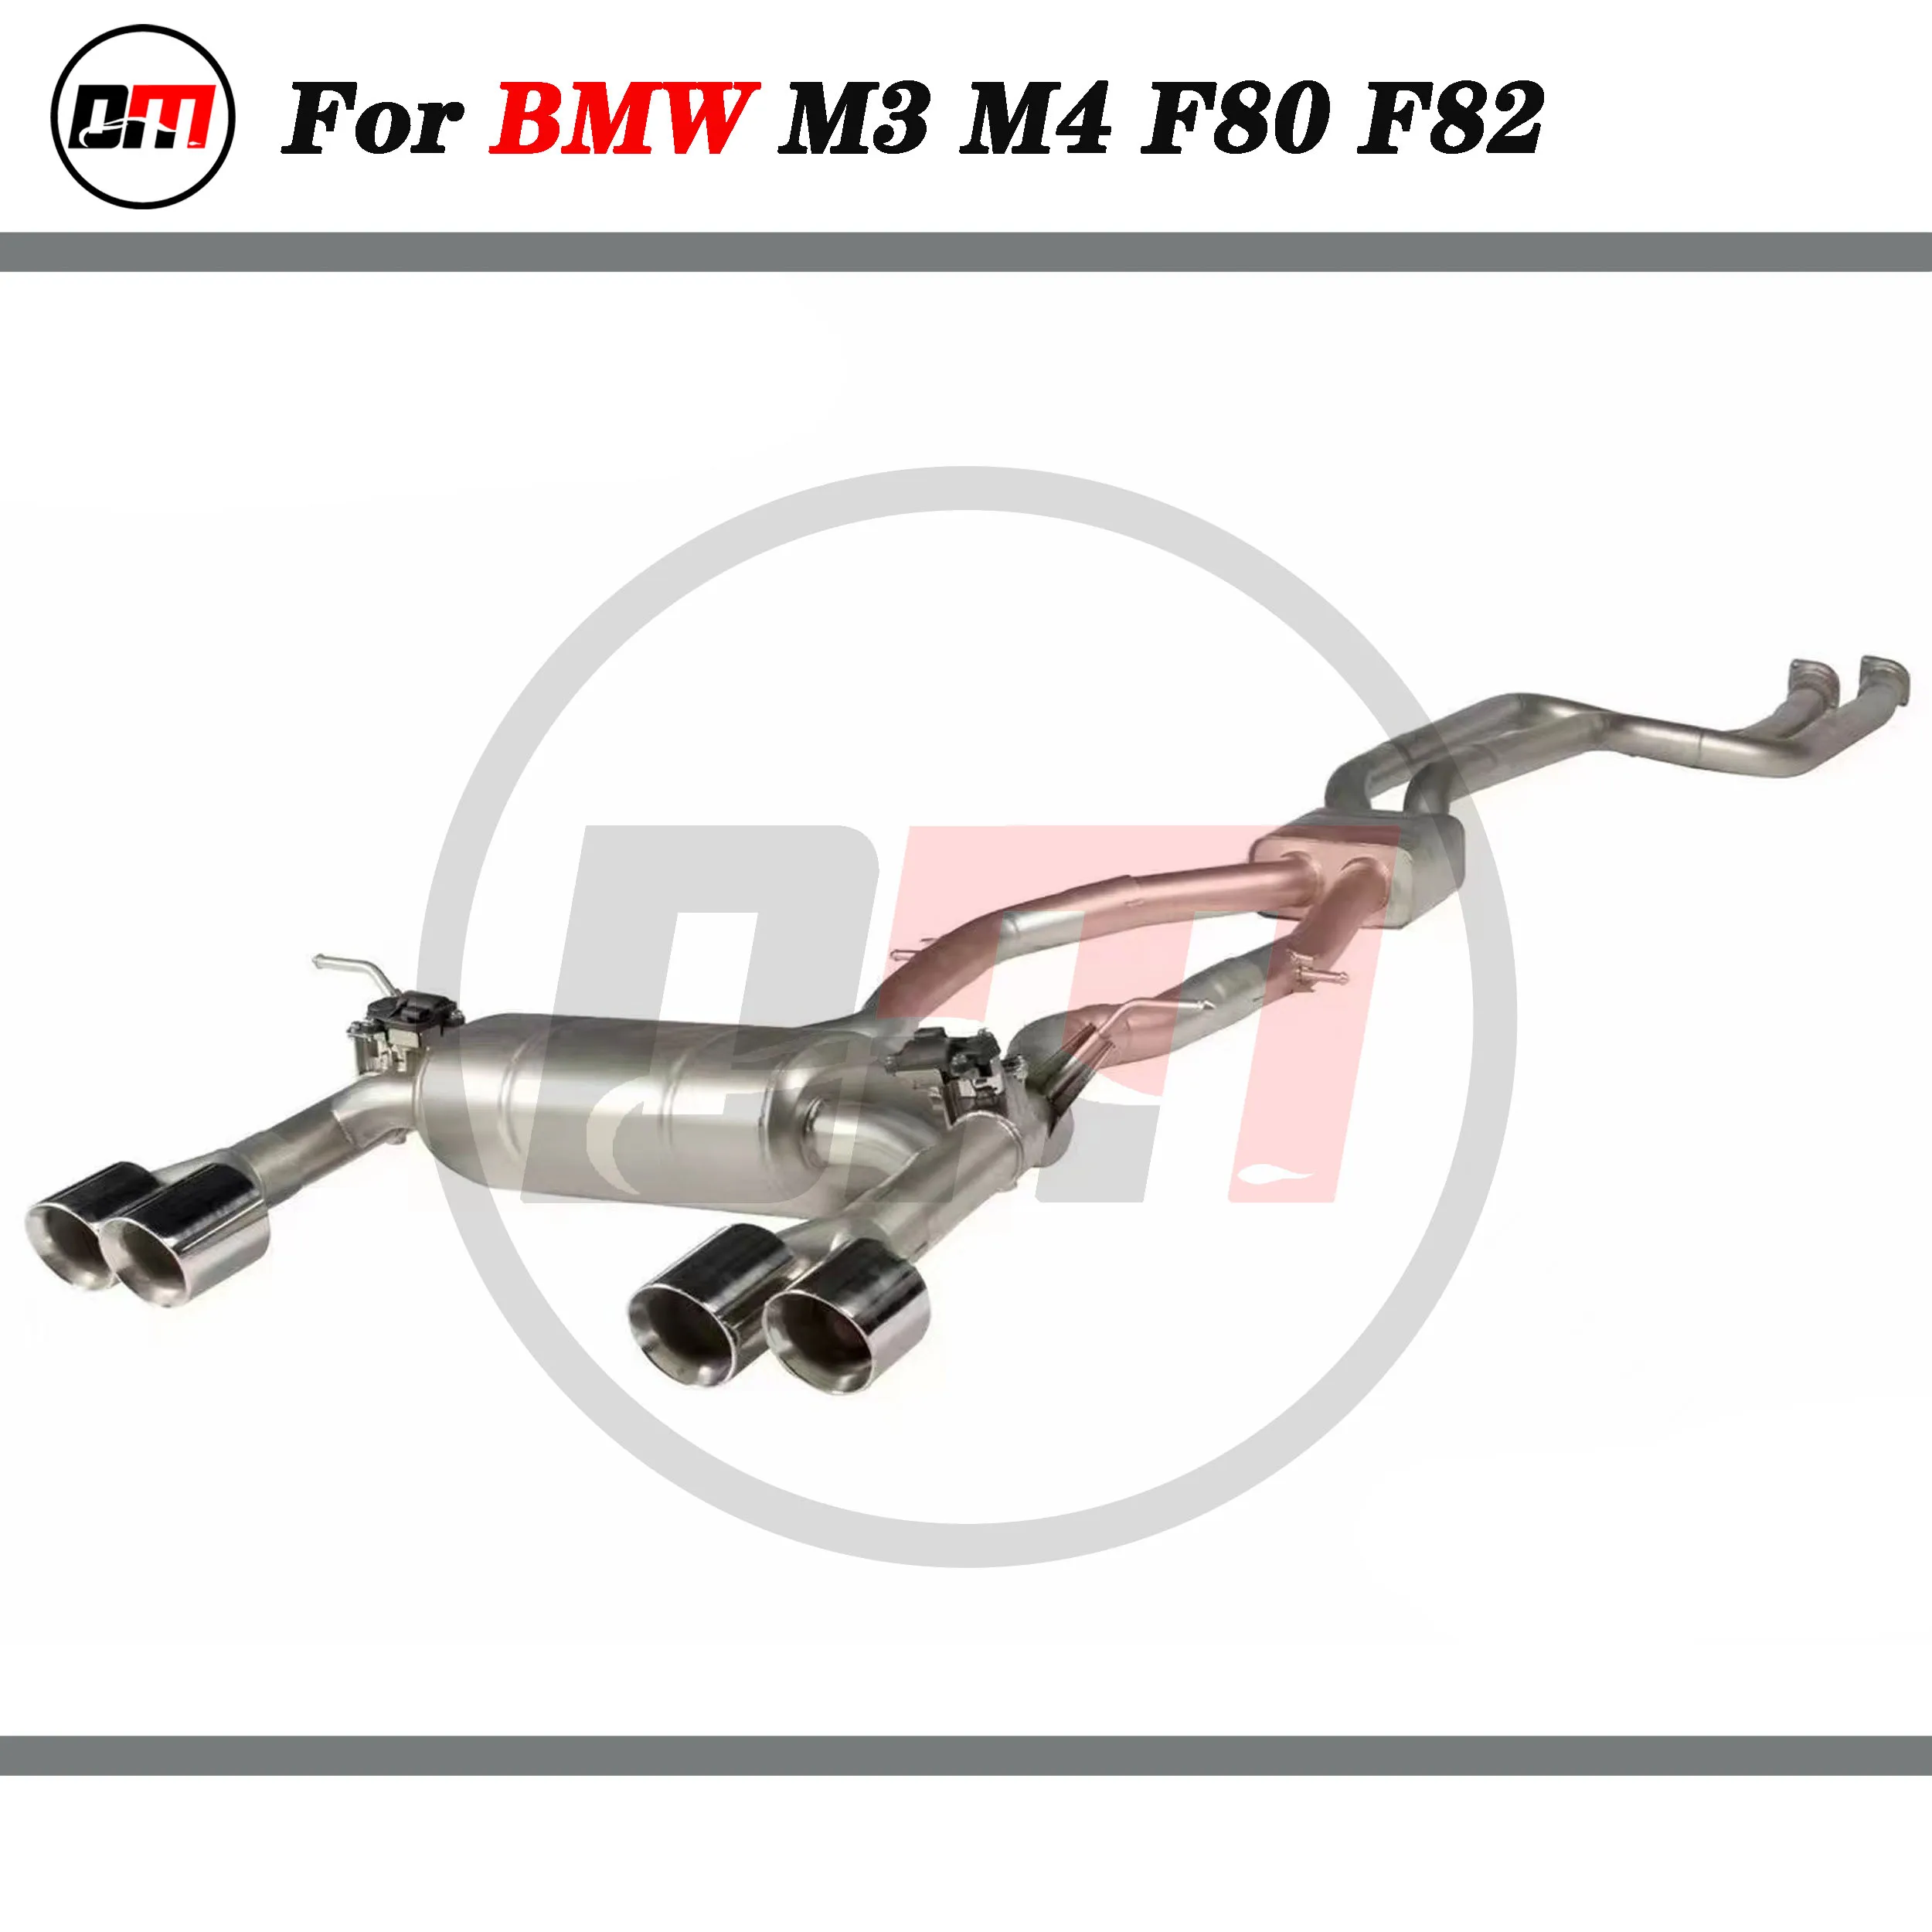 

DM exhaust stainless steel catback exhaust system for bmw m3 m4 f80 f82 catback pipe tips with valve muffler performance